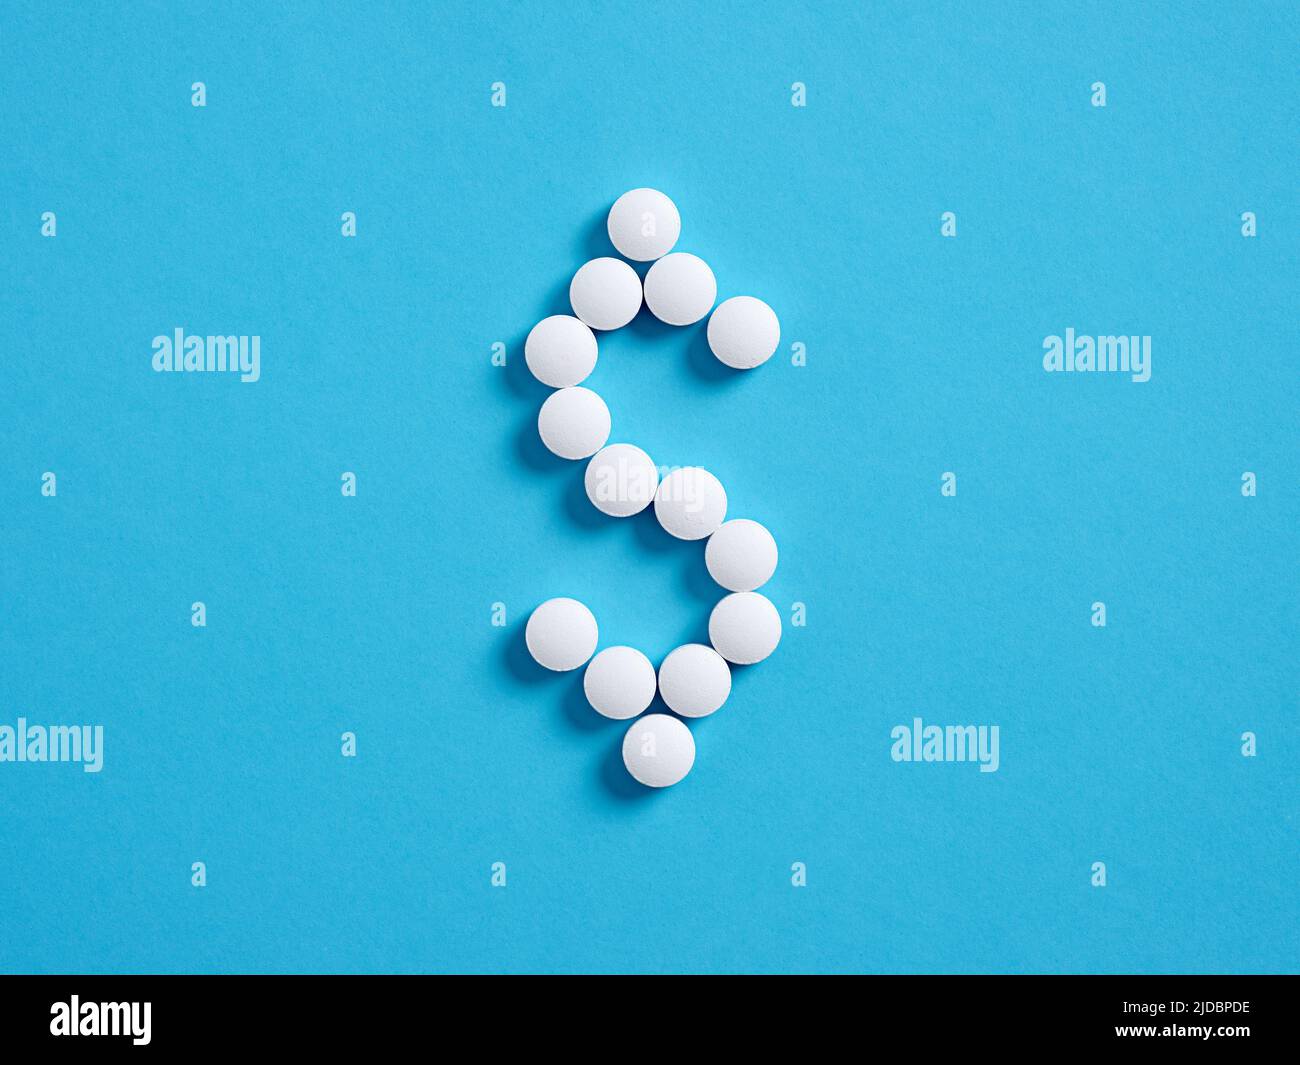 US dollar sign or symbol made with medical pills. Health care medicine expenses concept. Stock Photo